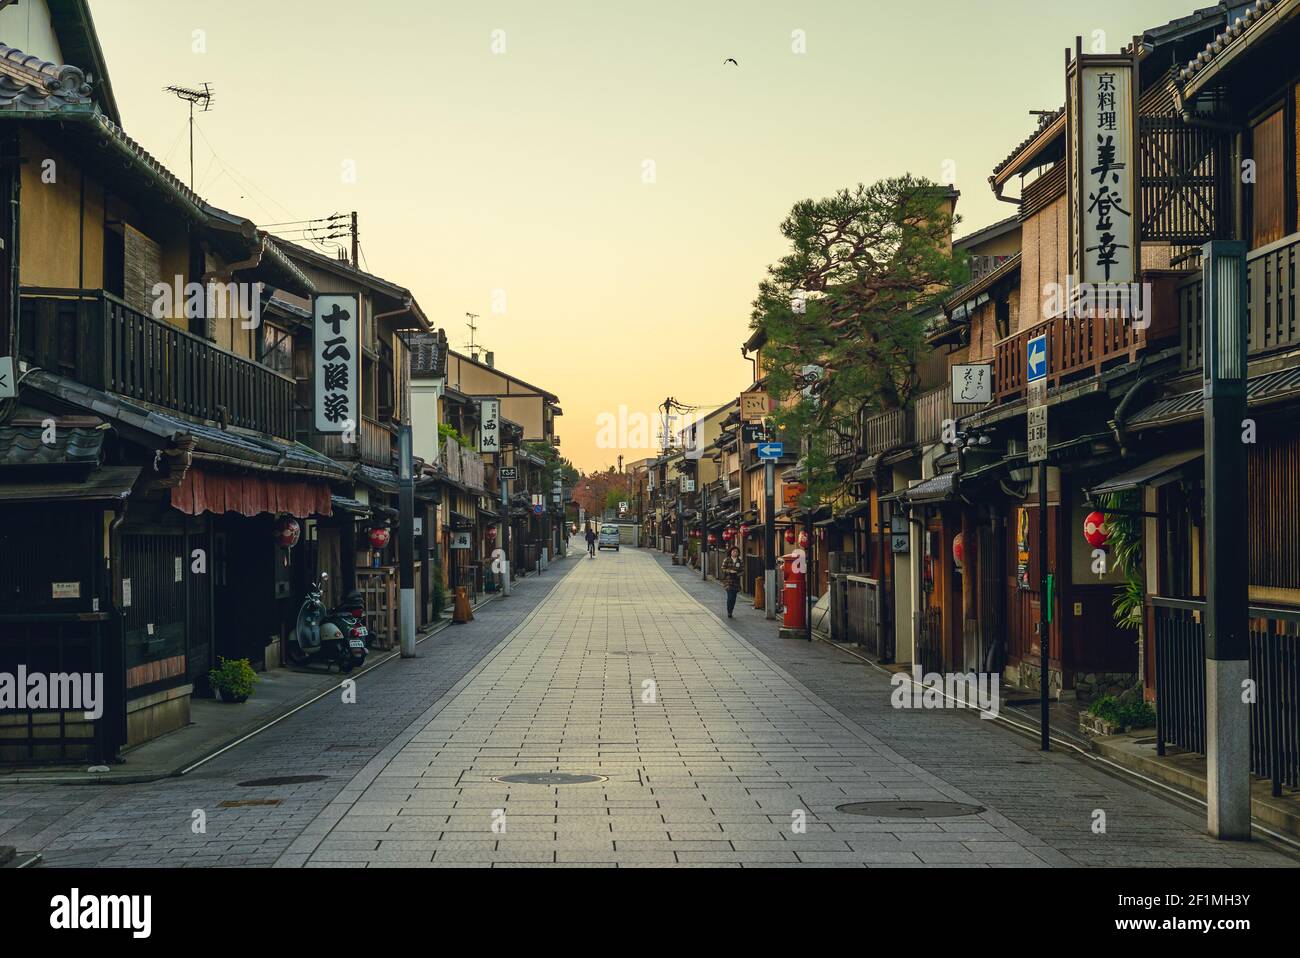 November 19, 2018: hanamikoji Dori, the main street of Gion located in kyoto, japan. It is one of the most famous street for its nostalgia atmosphere Stock Photo